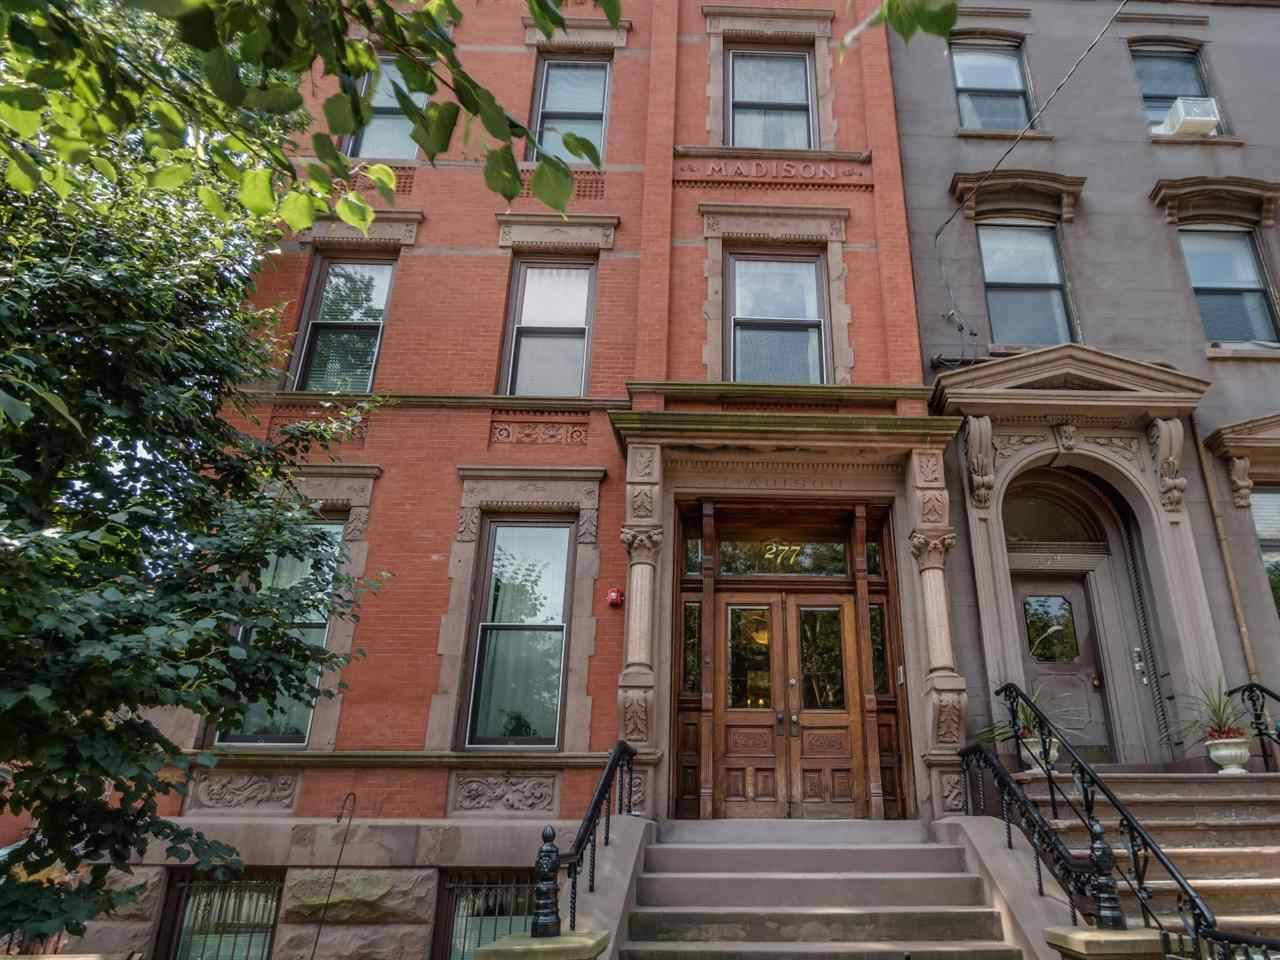 Step out to beautiful Van Vorst Park from this park-front home in historic Van Vorst community in Downtown Jersey City